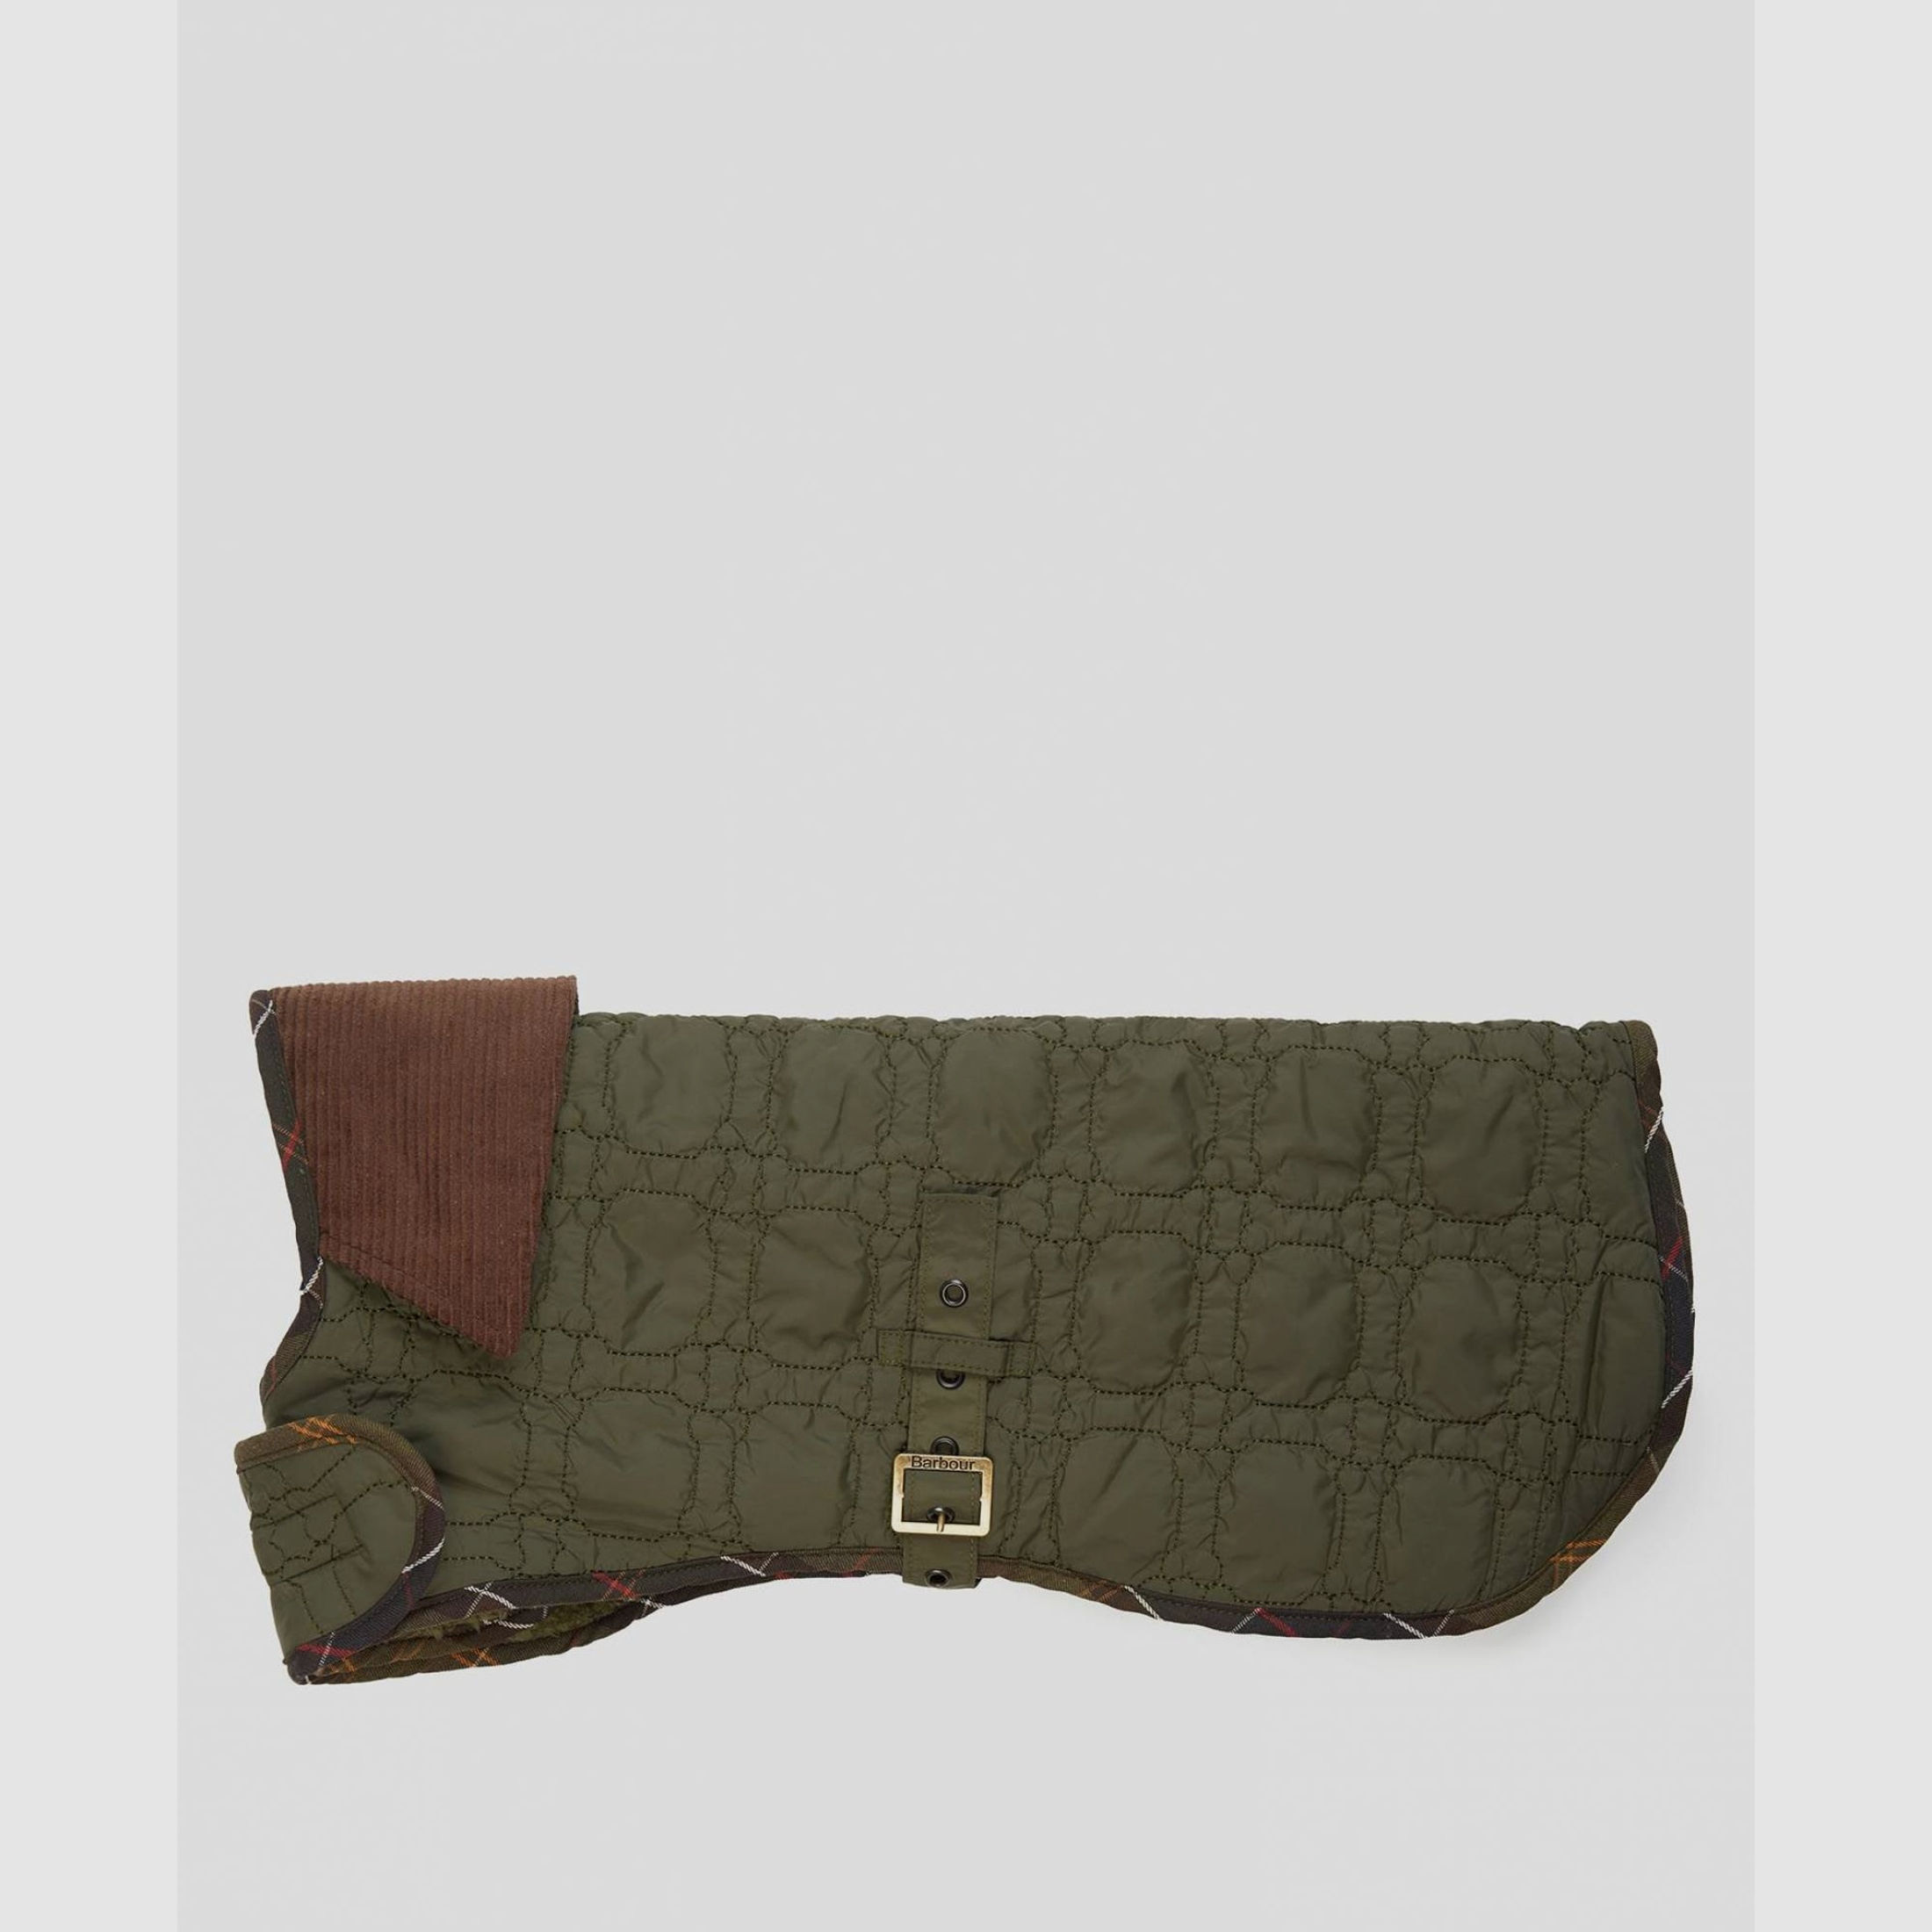 Barbour Hundemantel Bone Quilted, Farbe Olive XL